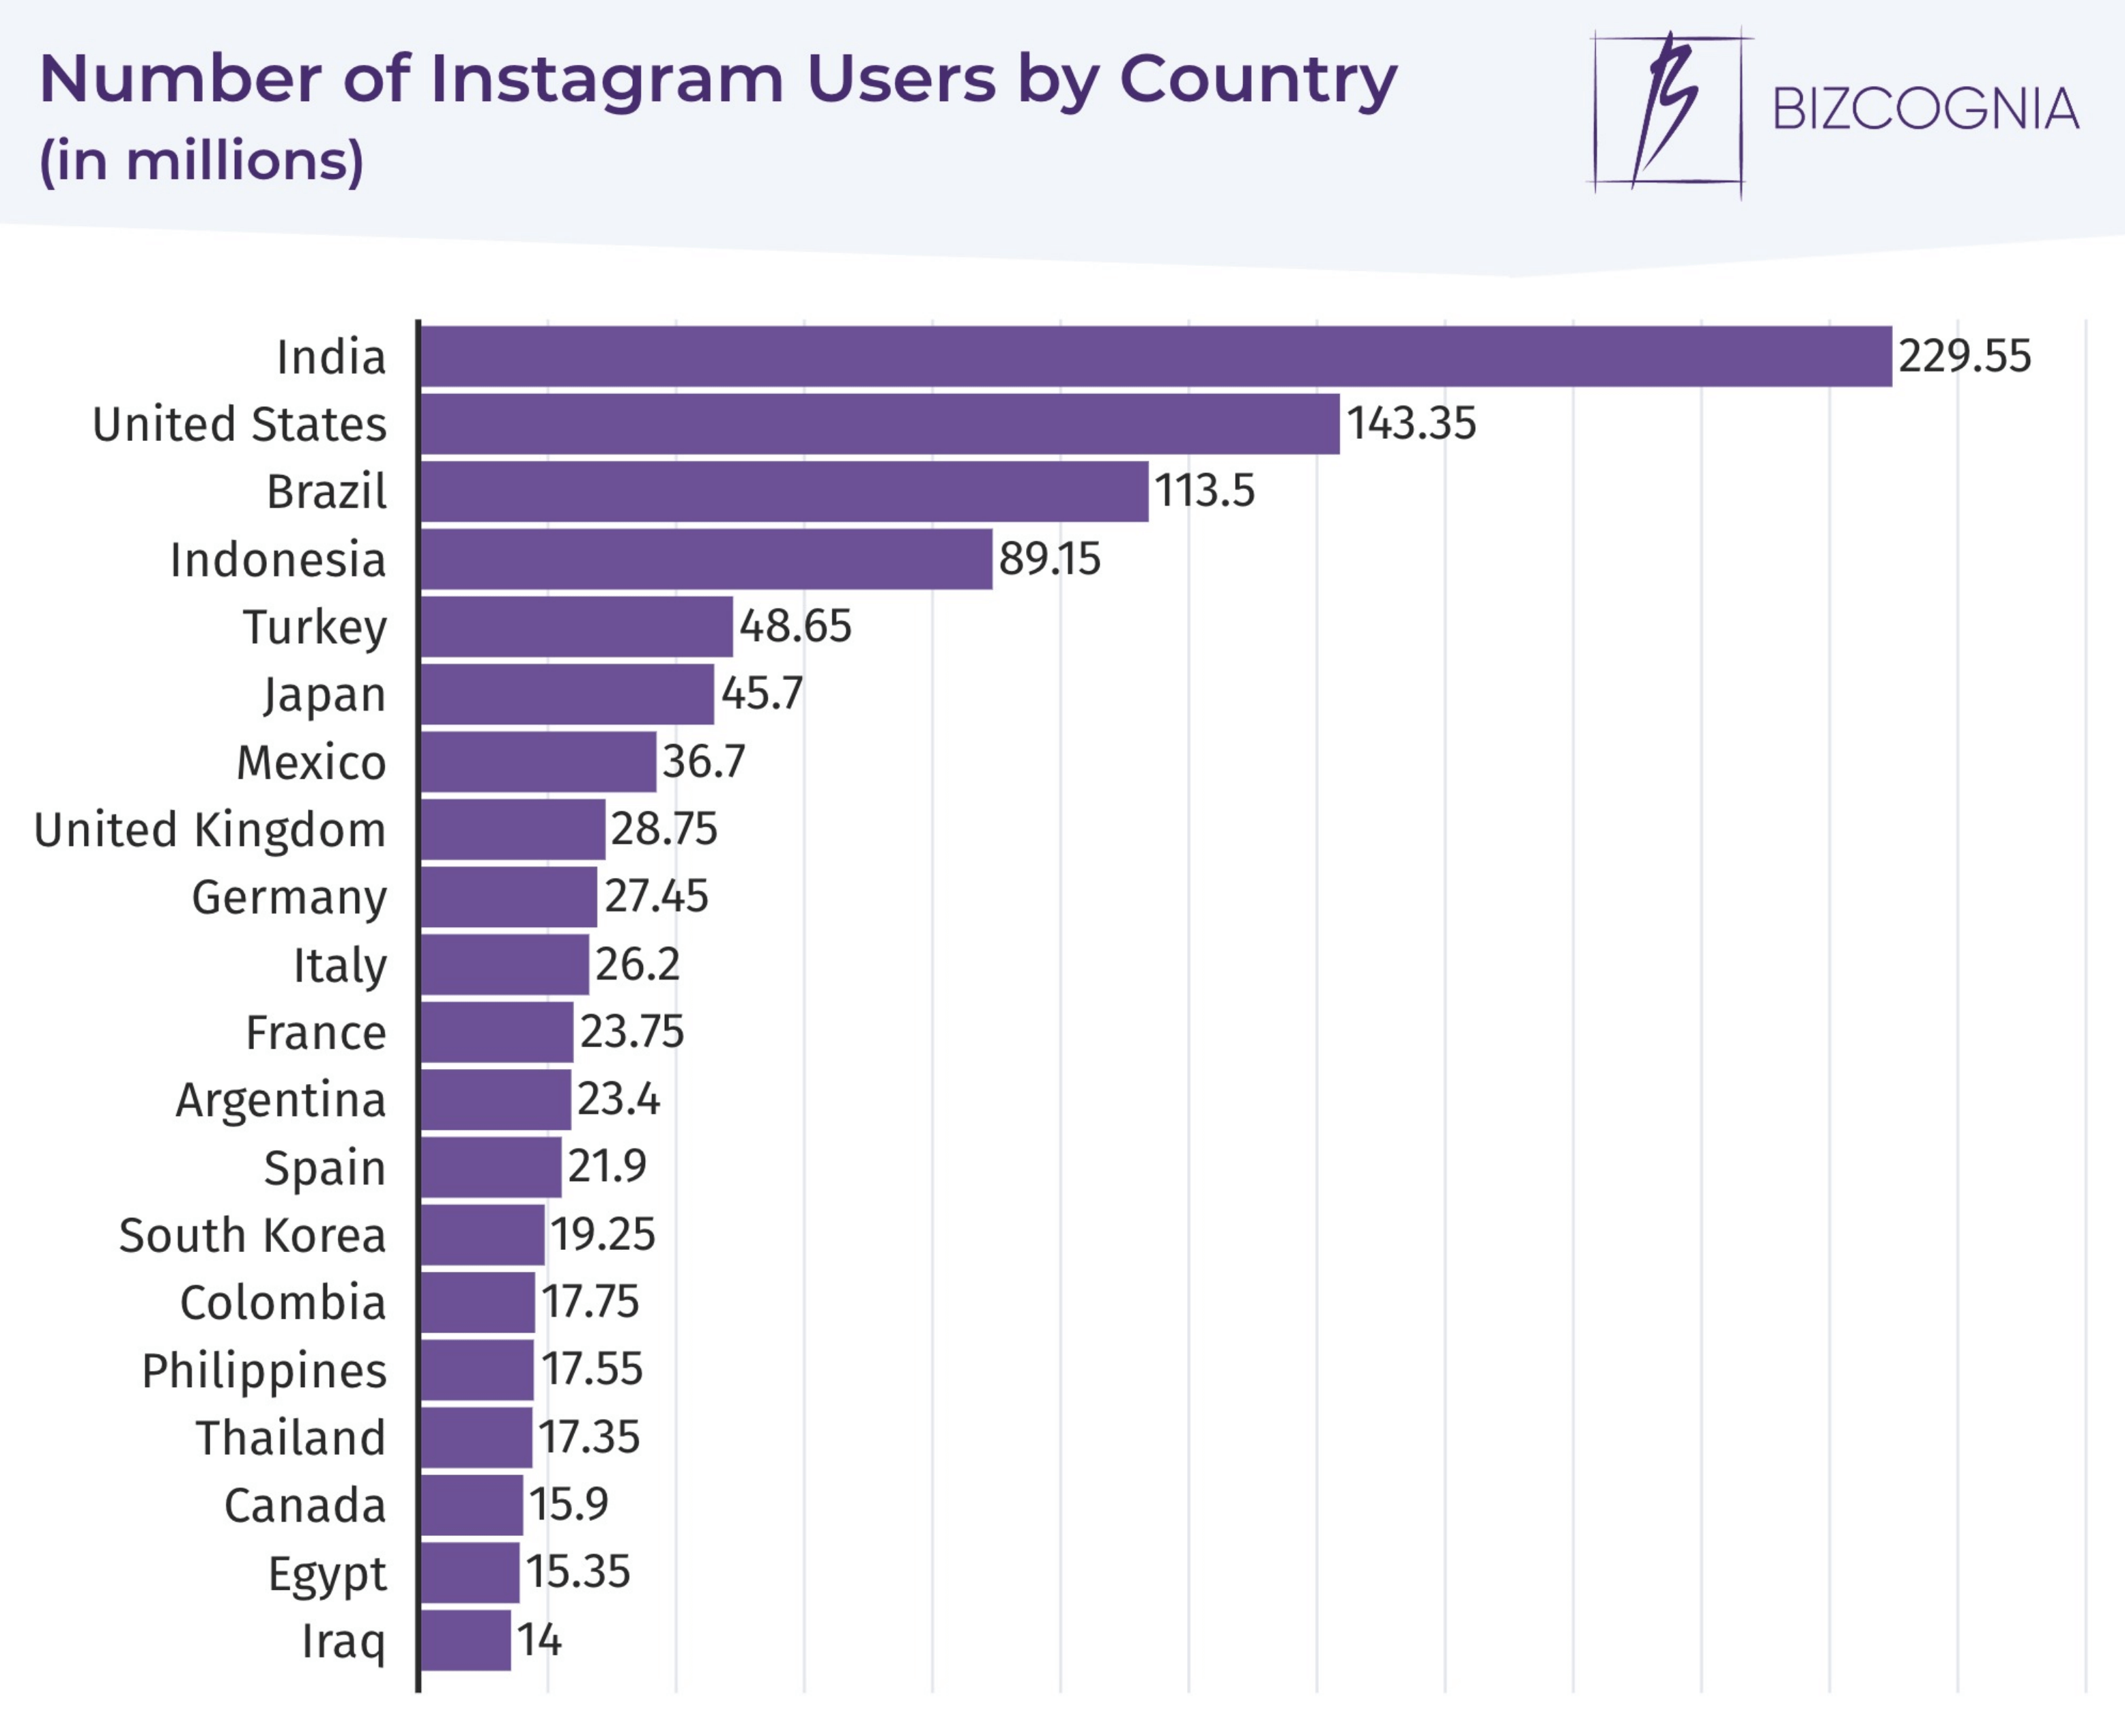 Countries with the highest number of Instagram users